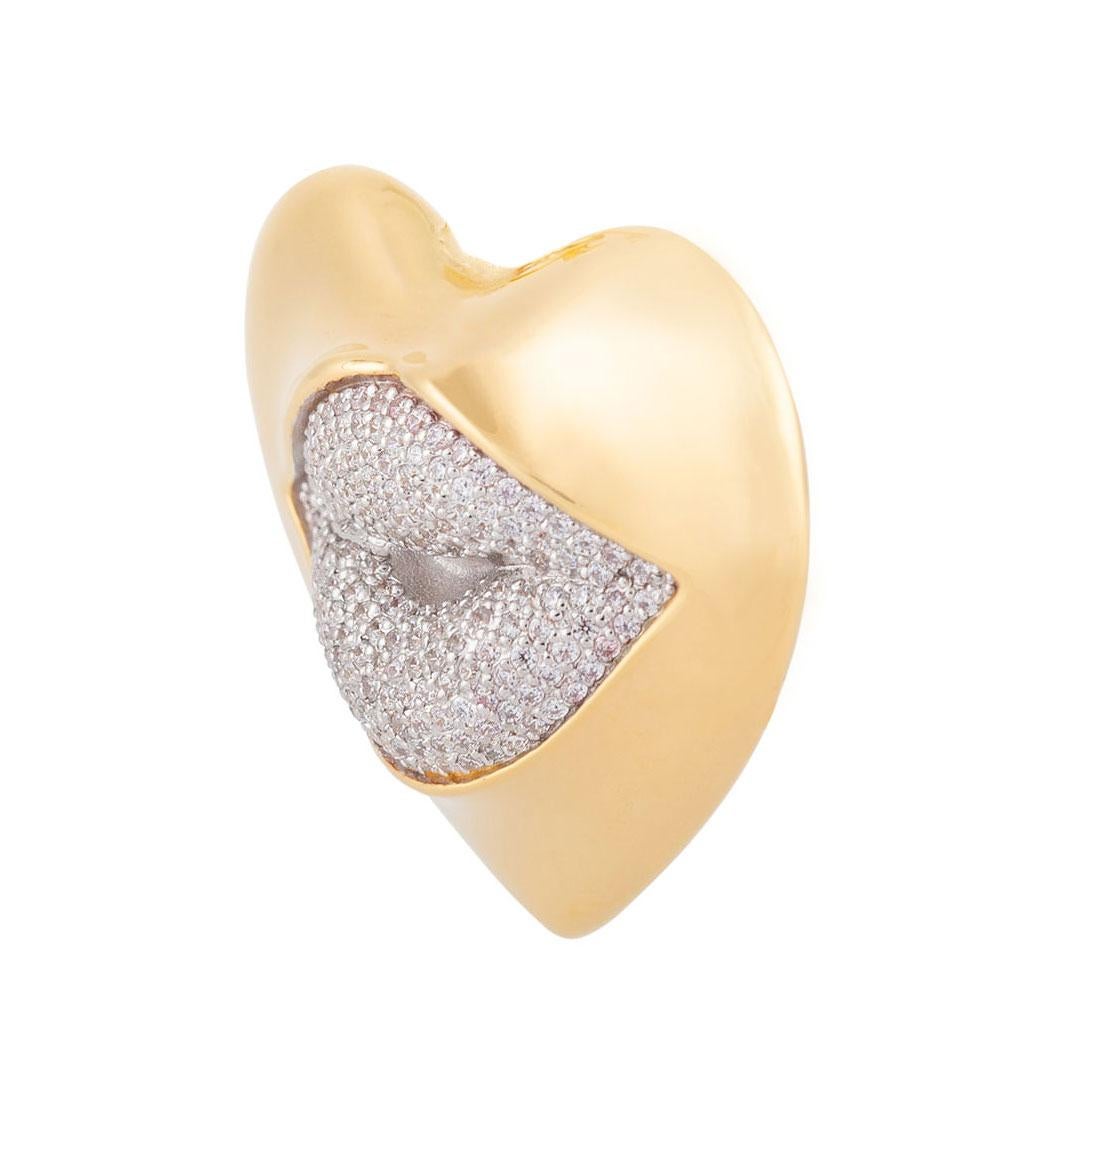 Love starts with the heart and lasts on the lips. This might be the sexiest brooch ever! Our sexy gold statement heart brooch with a diamond kiss. Shine your love on!

Composition: Sterling Silver, 18k gold vermeil and Rhodium plated.
Color: Gold &